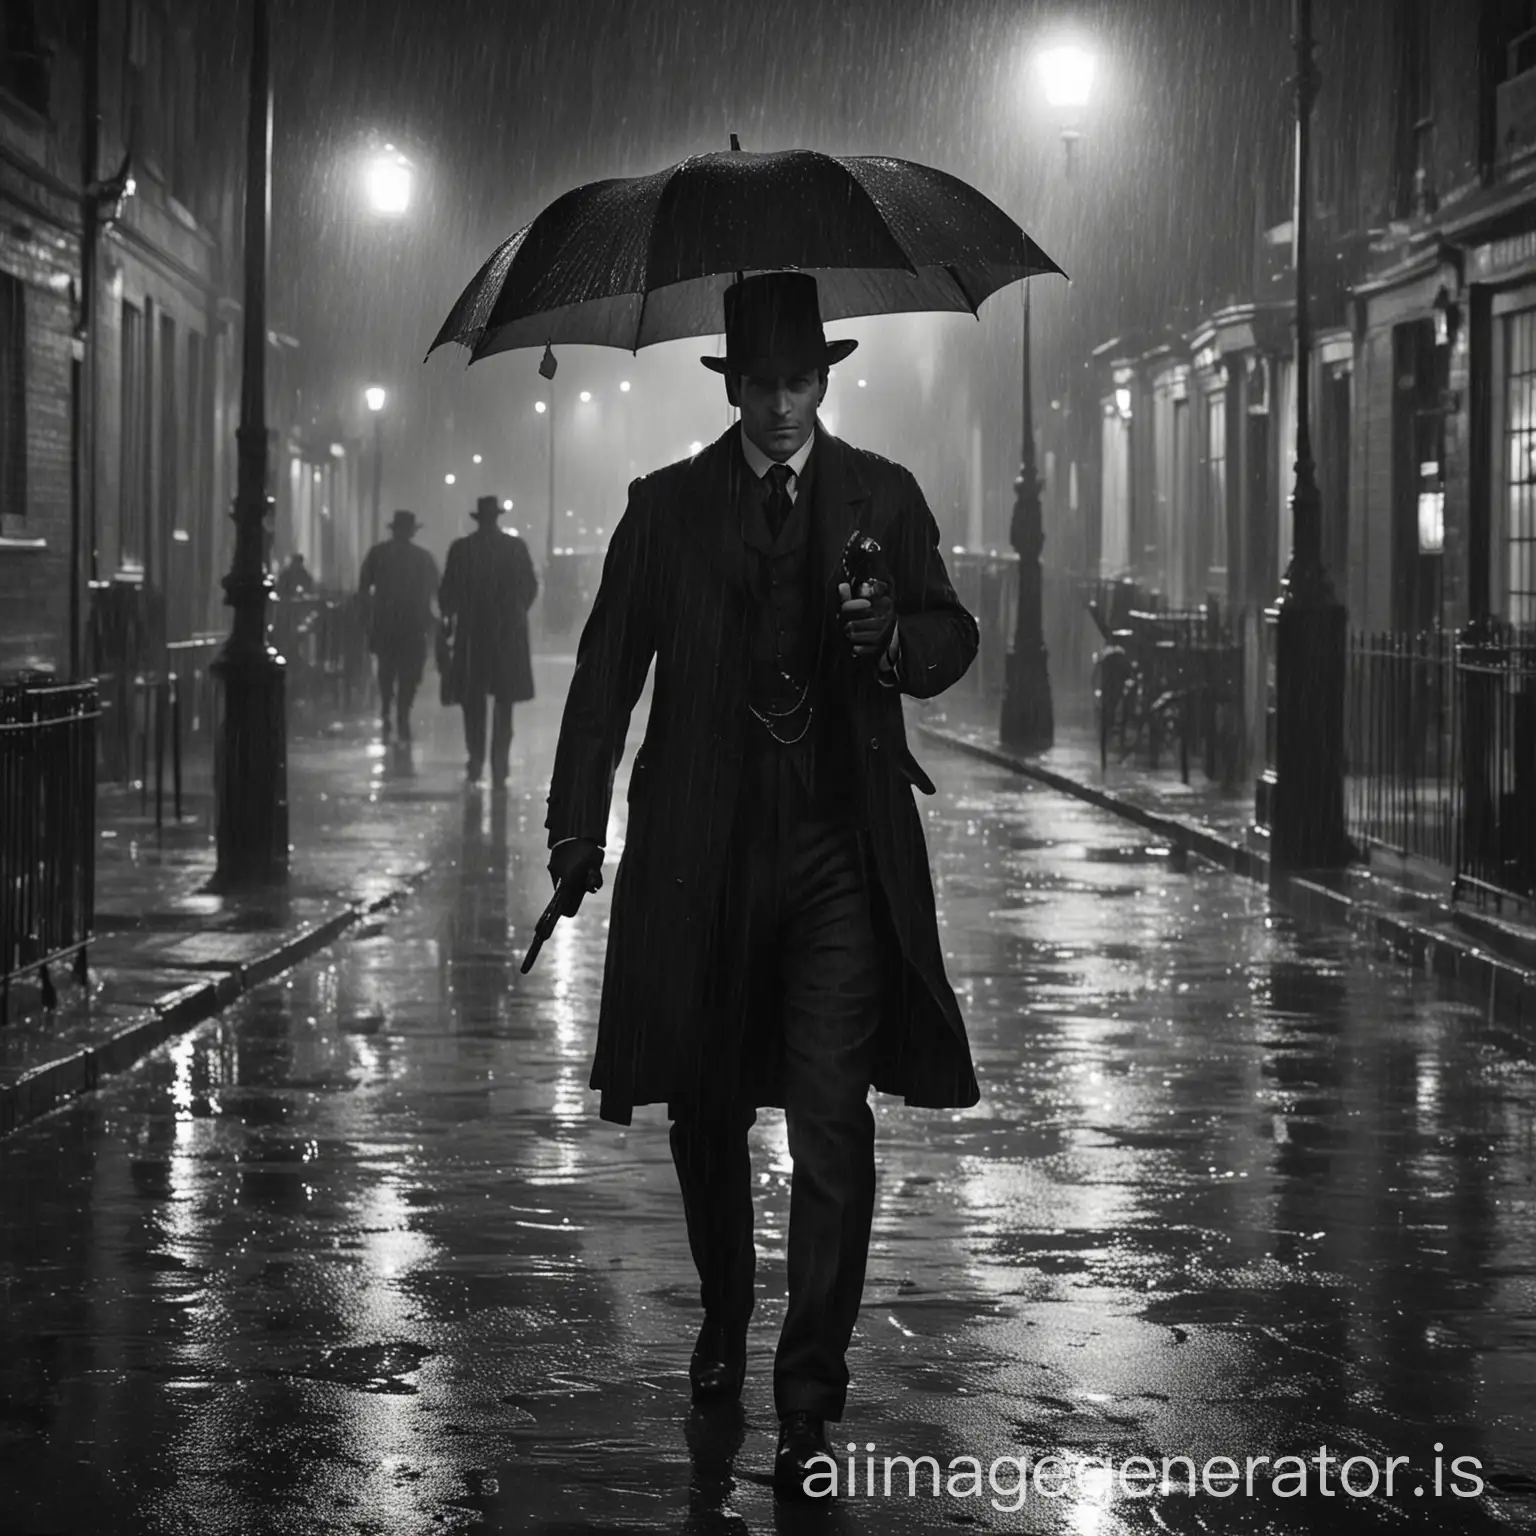 Street of London 1900 year. Heavy rain at night. Man I black suit with the pistol walking toward. No umbrella in picture.Picture quality image.